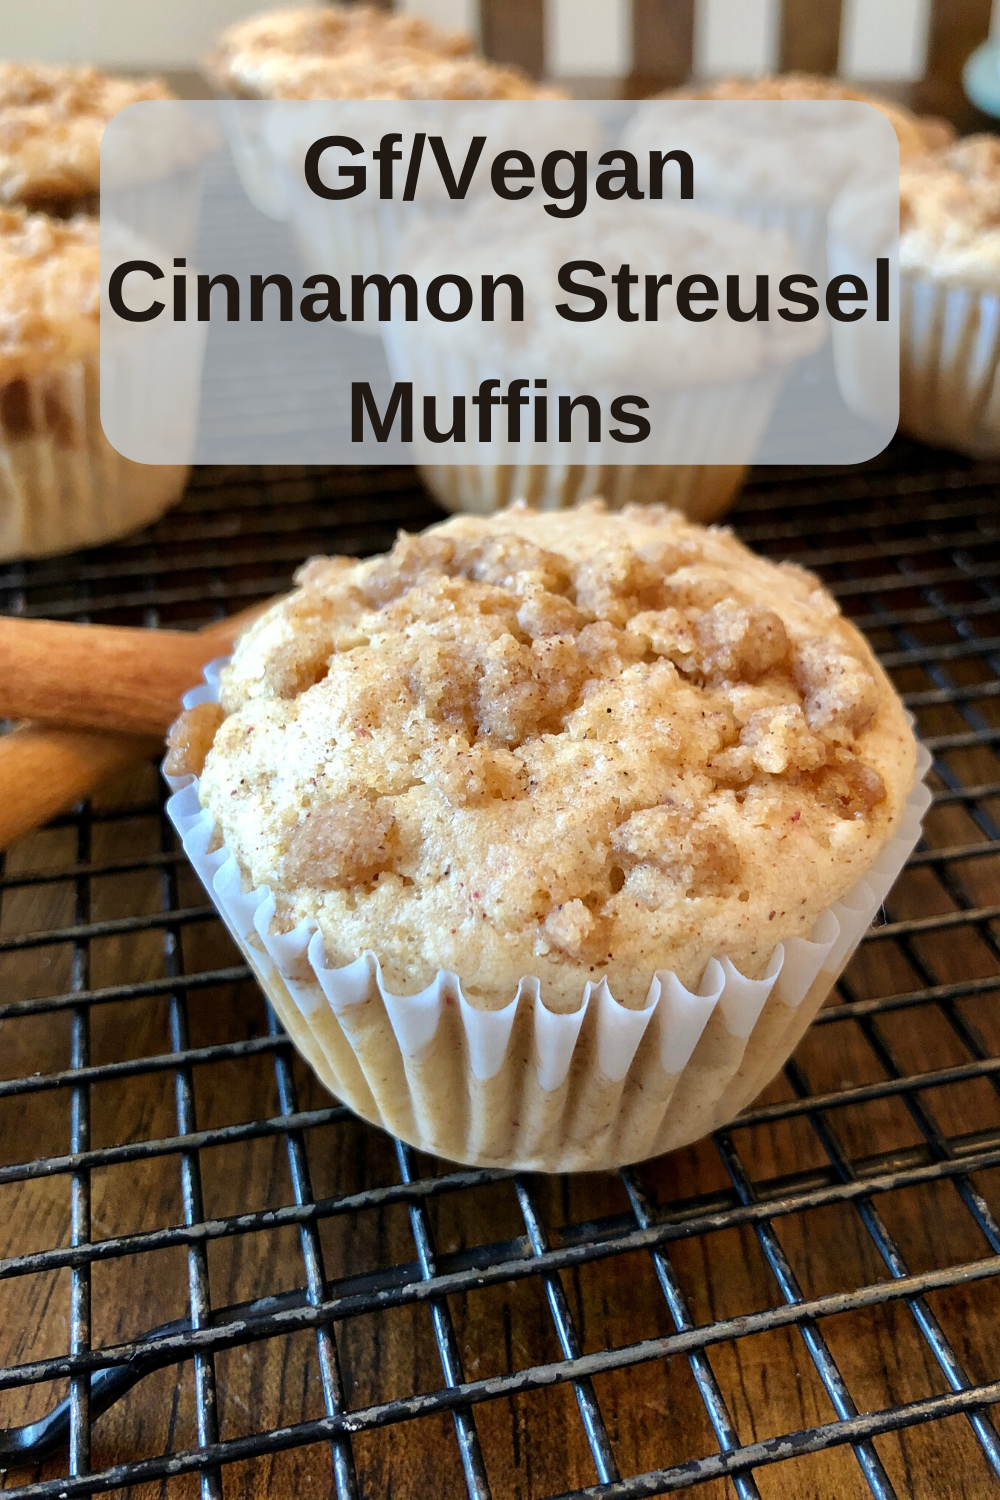 This #glutenfree #vegan cinnamon streusel muffin recipe is just what you need for brunch!